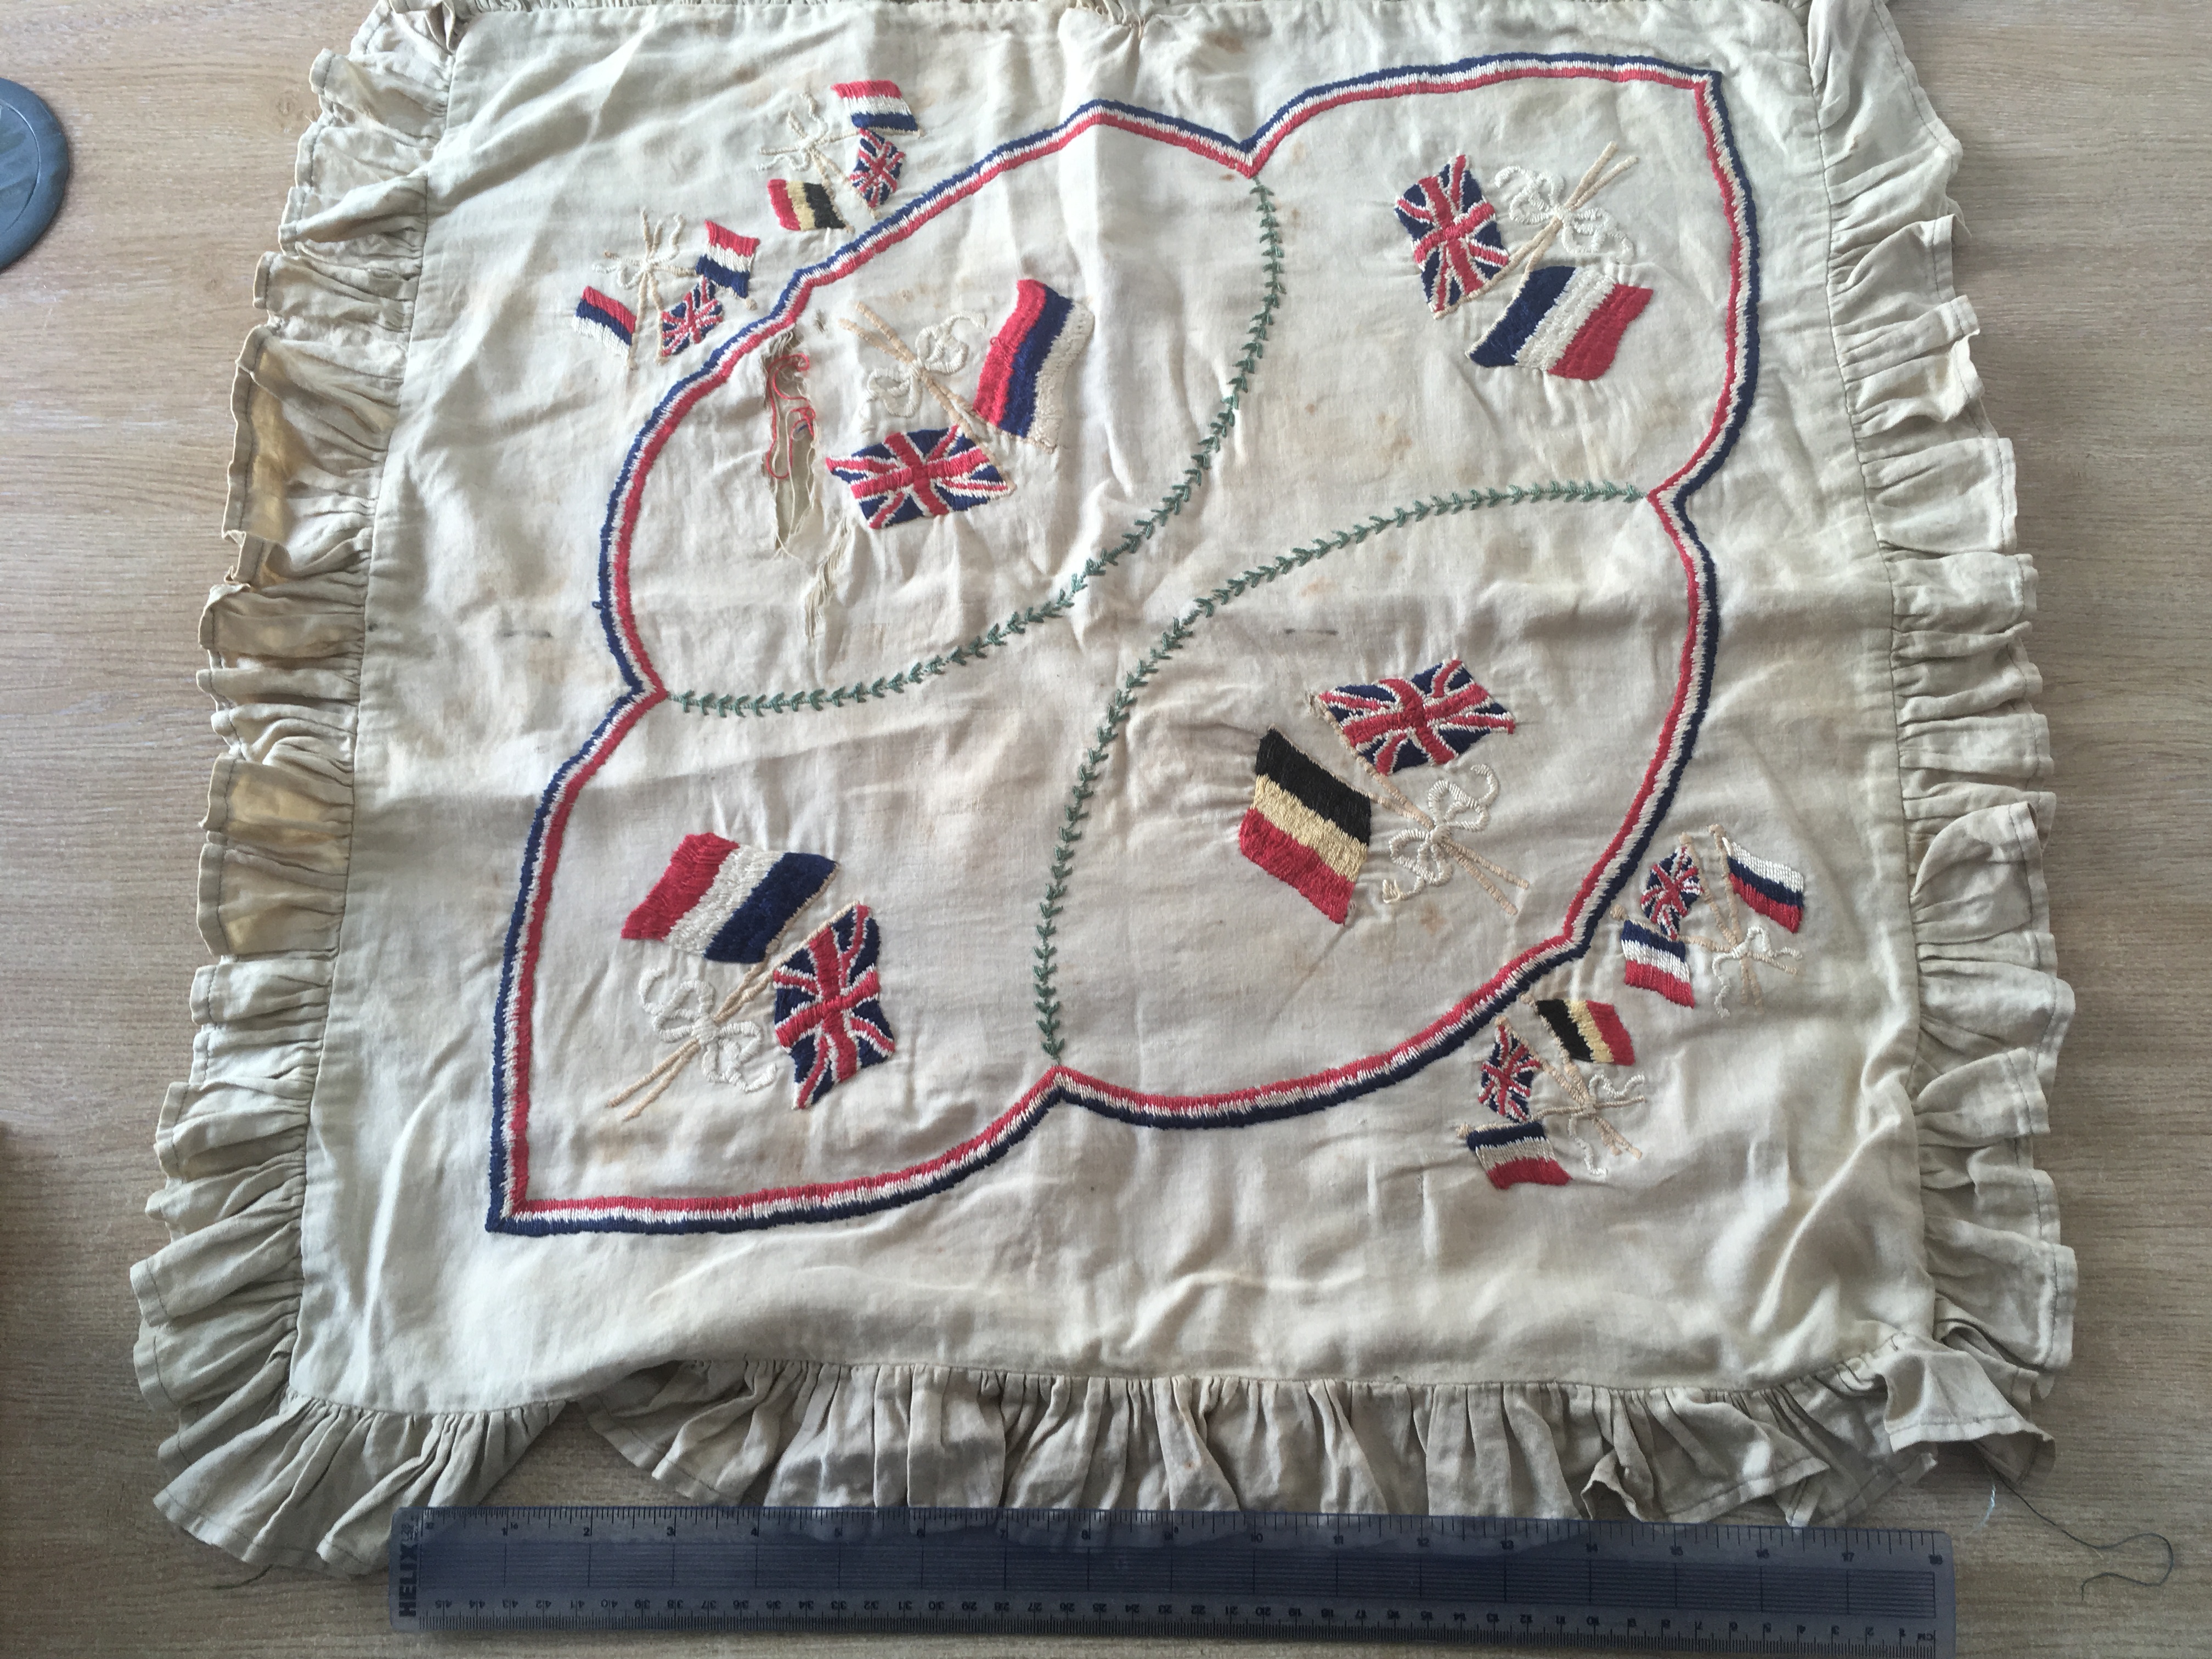 CIRCA WWI CUSHION COVERS, TWO EMBROIDERED AND ONE PAINTED ON SILK (IN POOR CONDITION). - Image 3 of 3